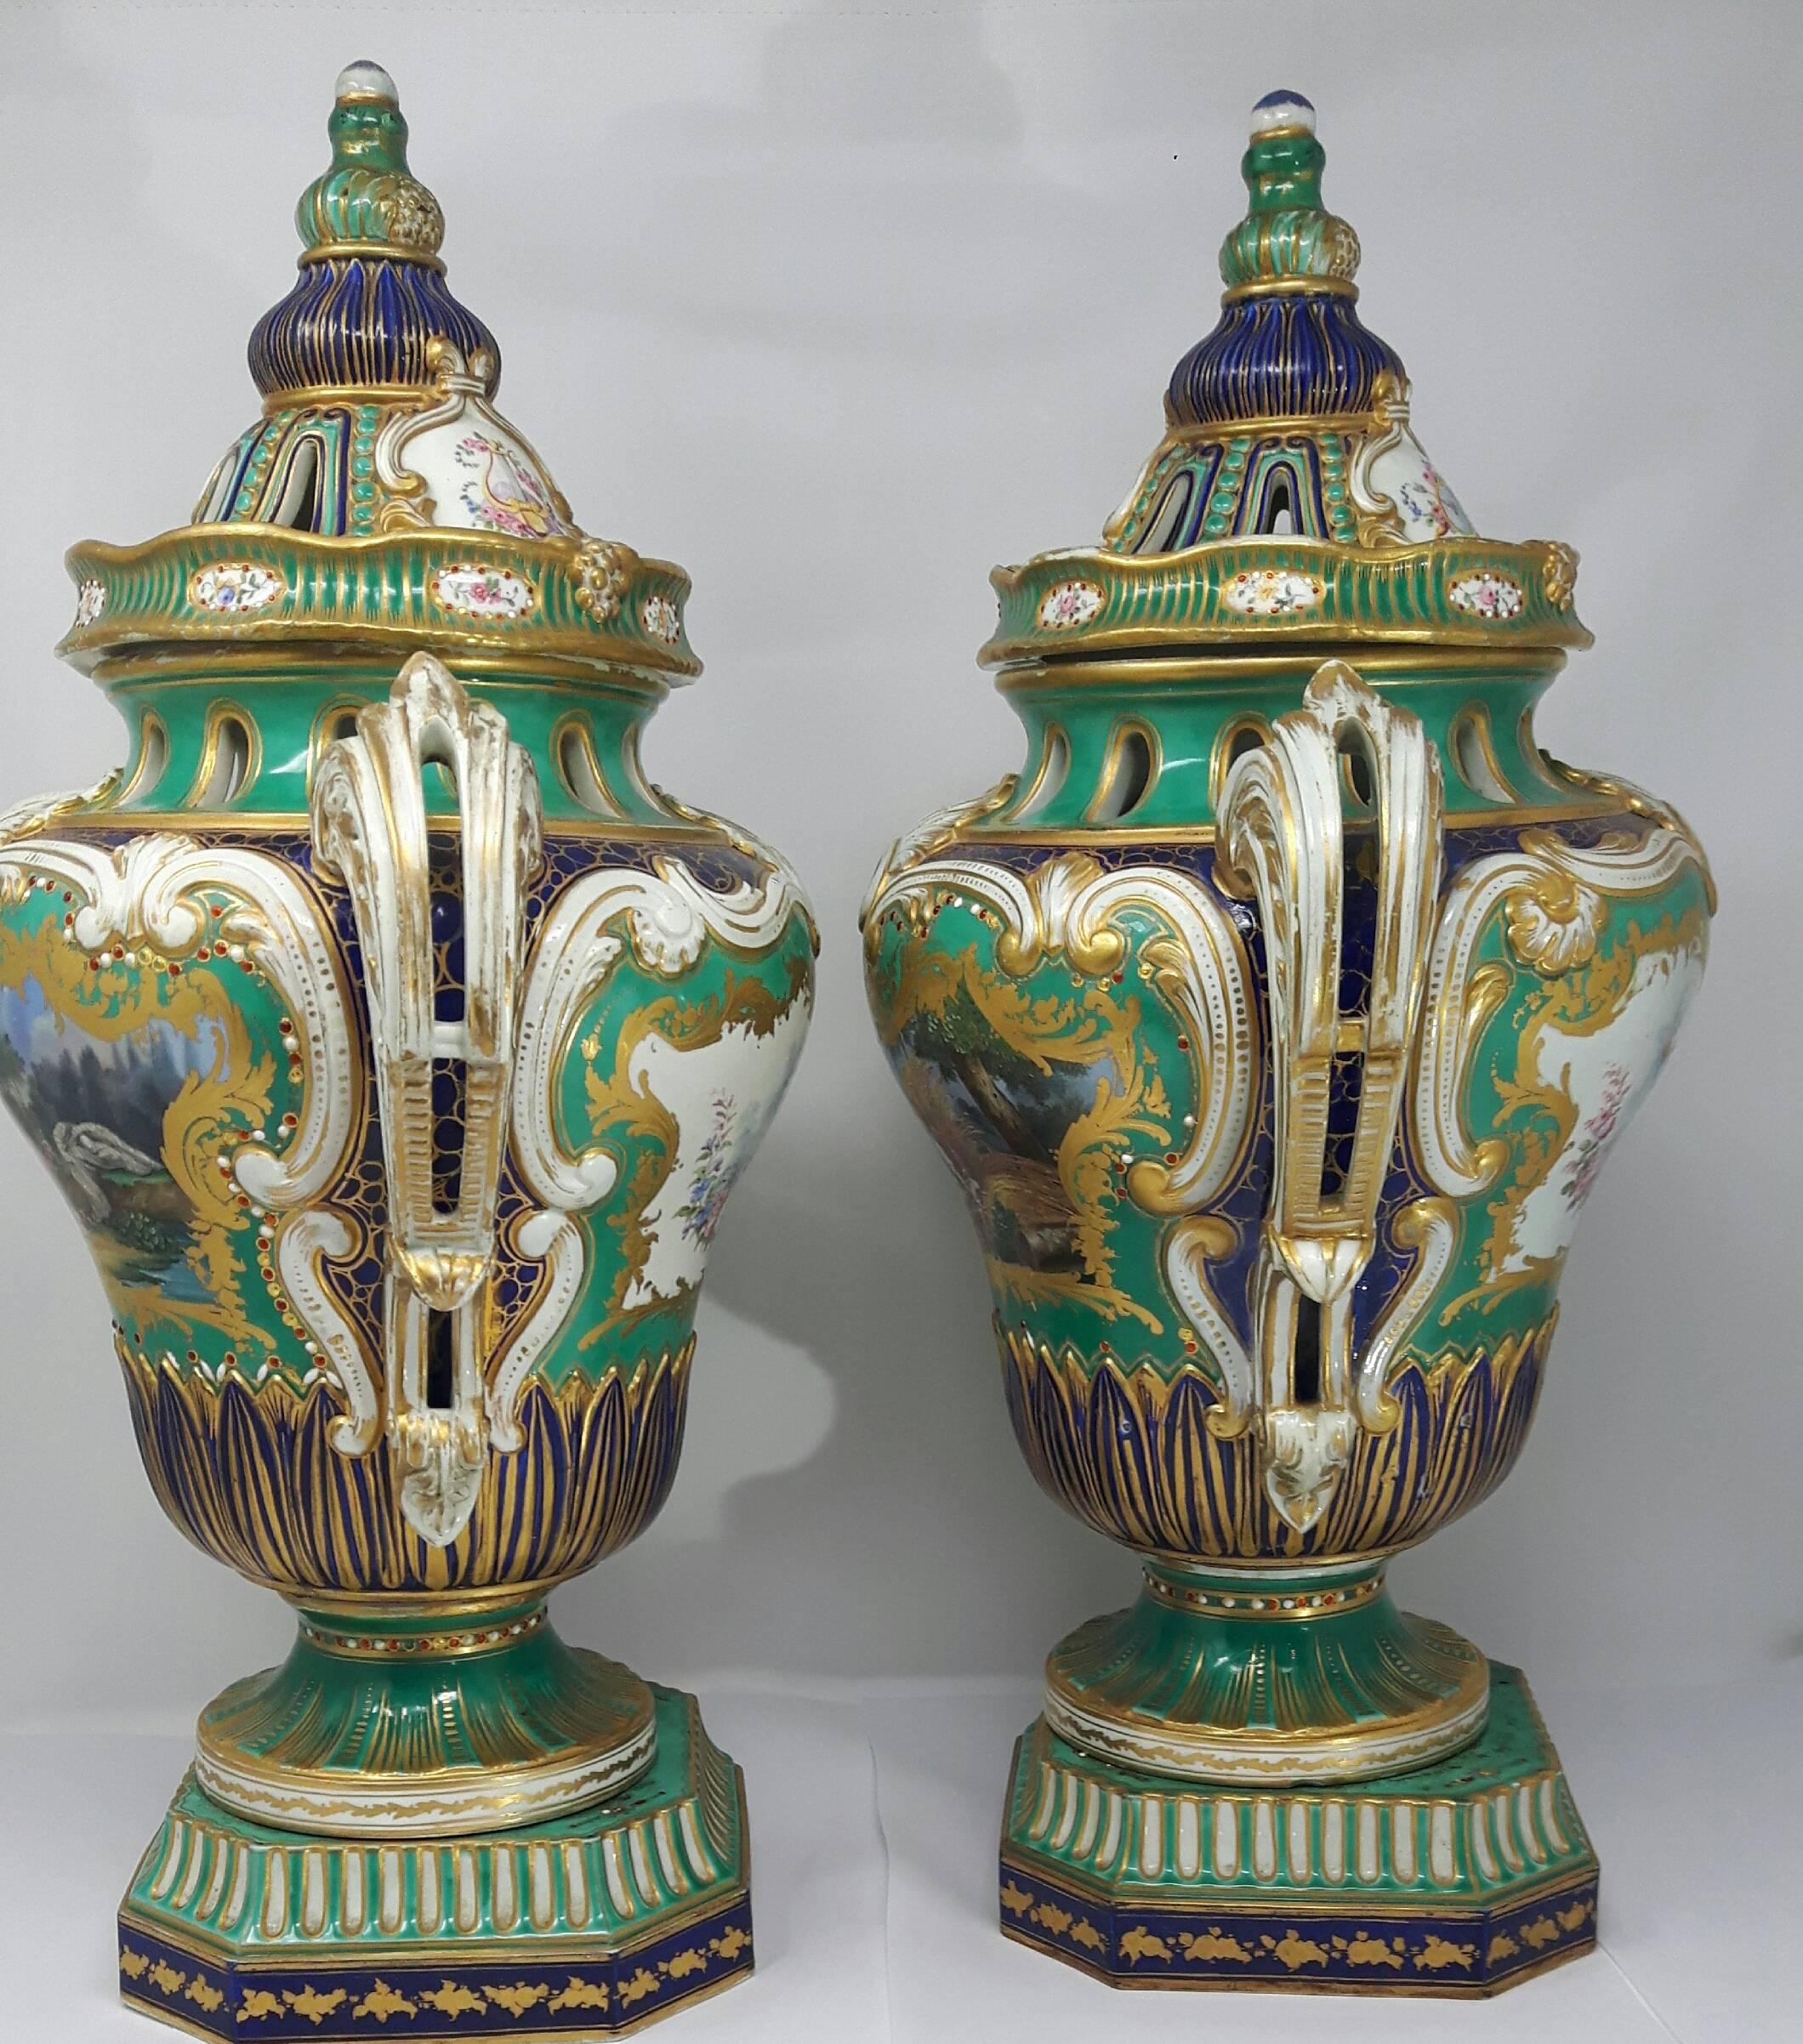 A monumental pair of sever vases. Each vase beautifully painted with scenes of classical figures and exotic birds against a pale green and cobalt blue background.